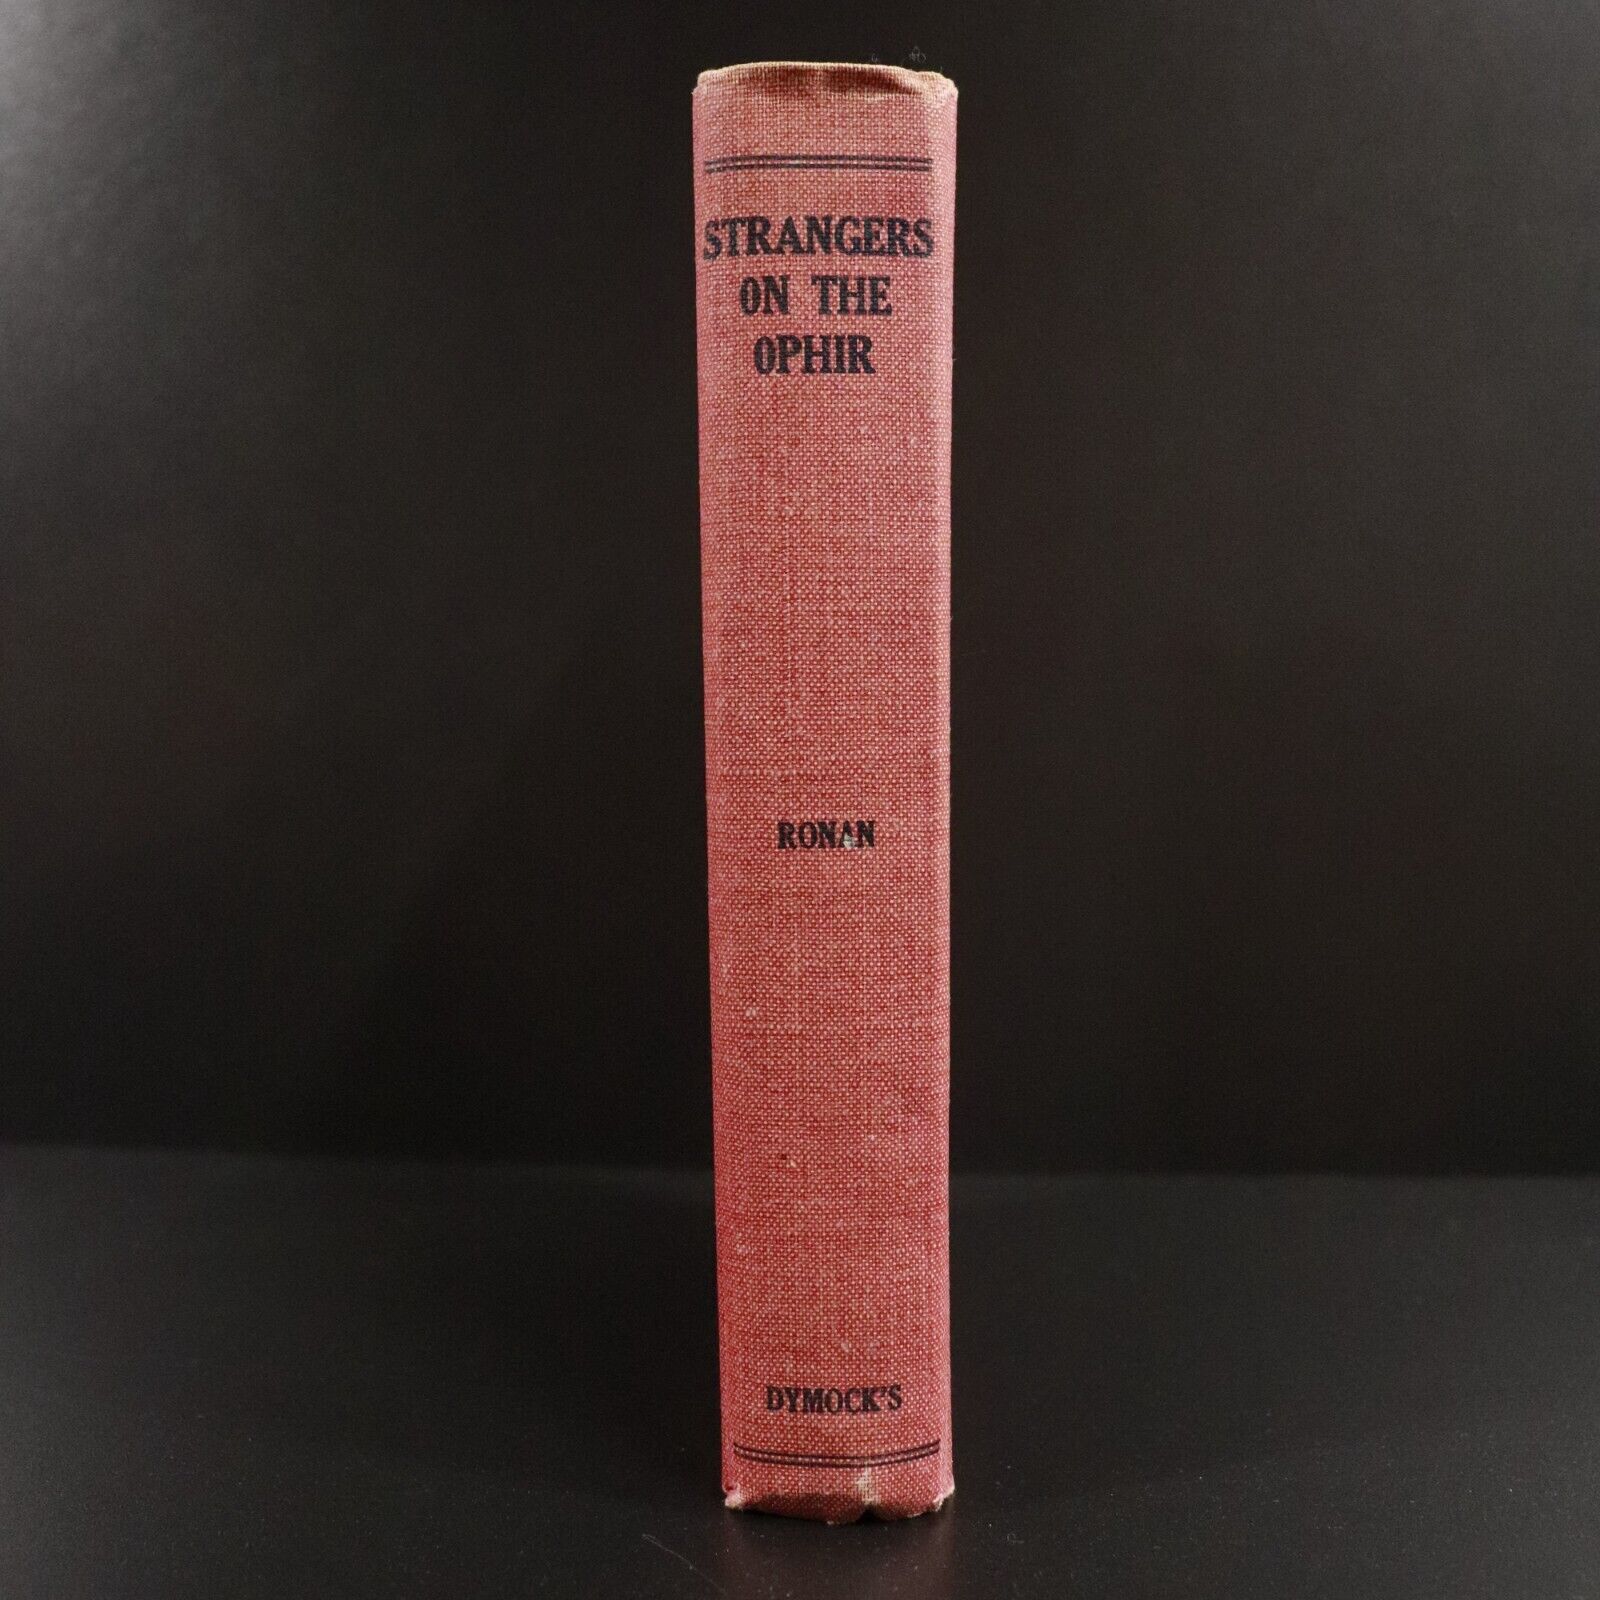 1945 Strangers On The Ophir by Tom Ronan 1st Edition Australian Fiction Book